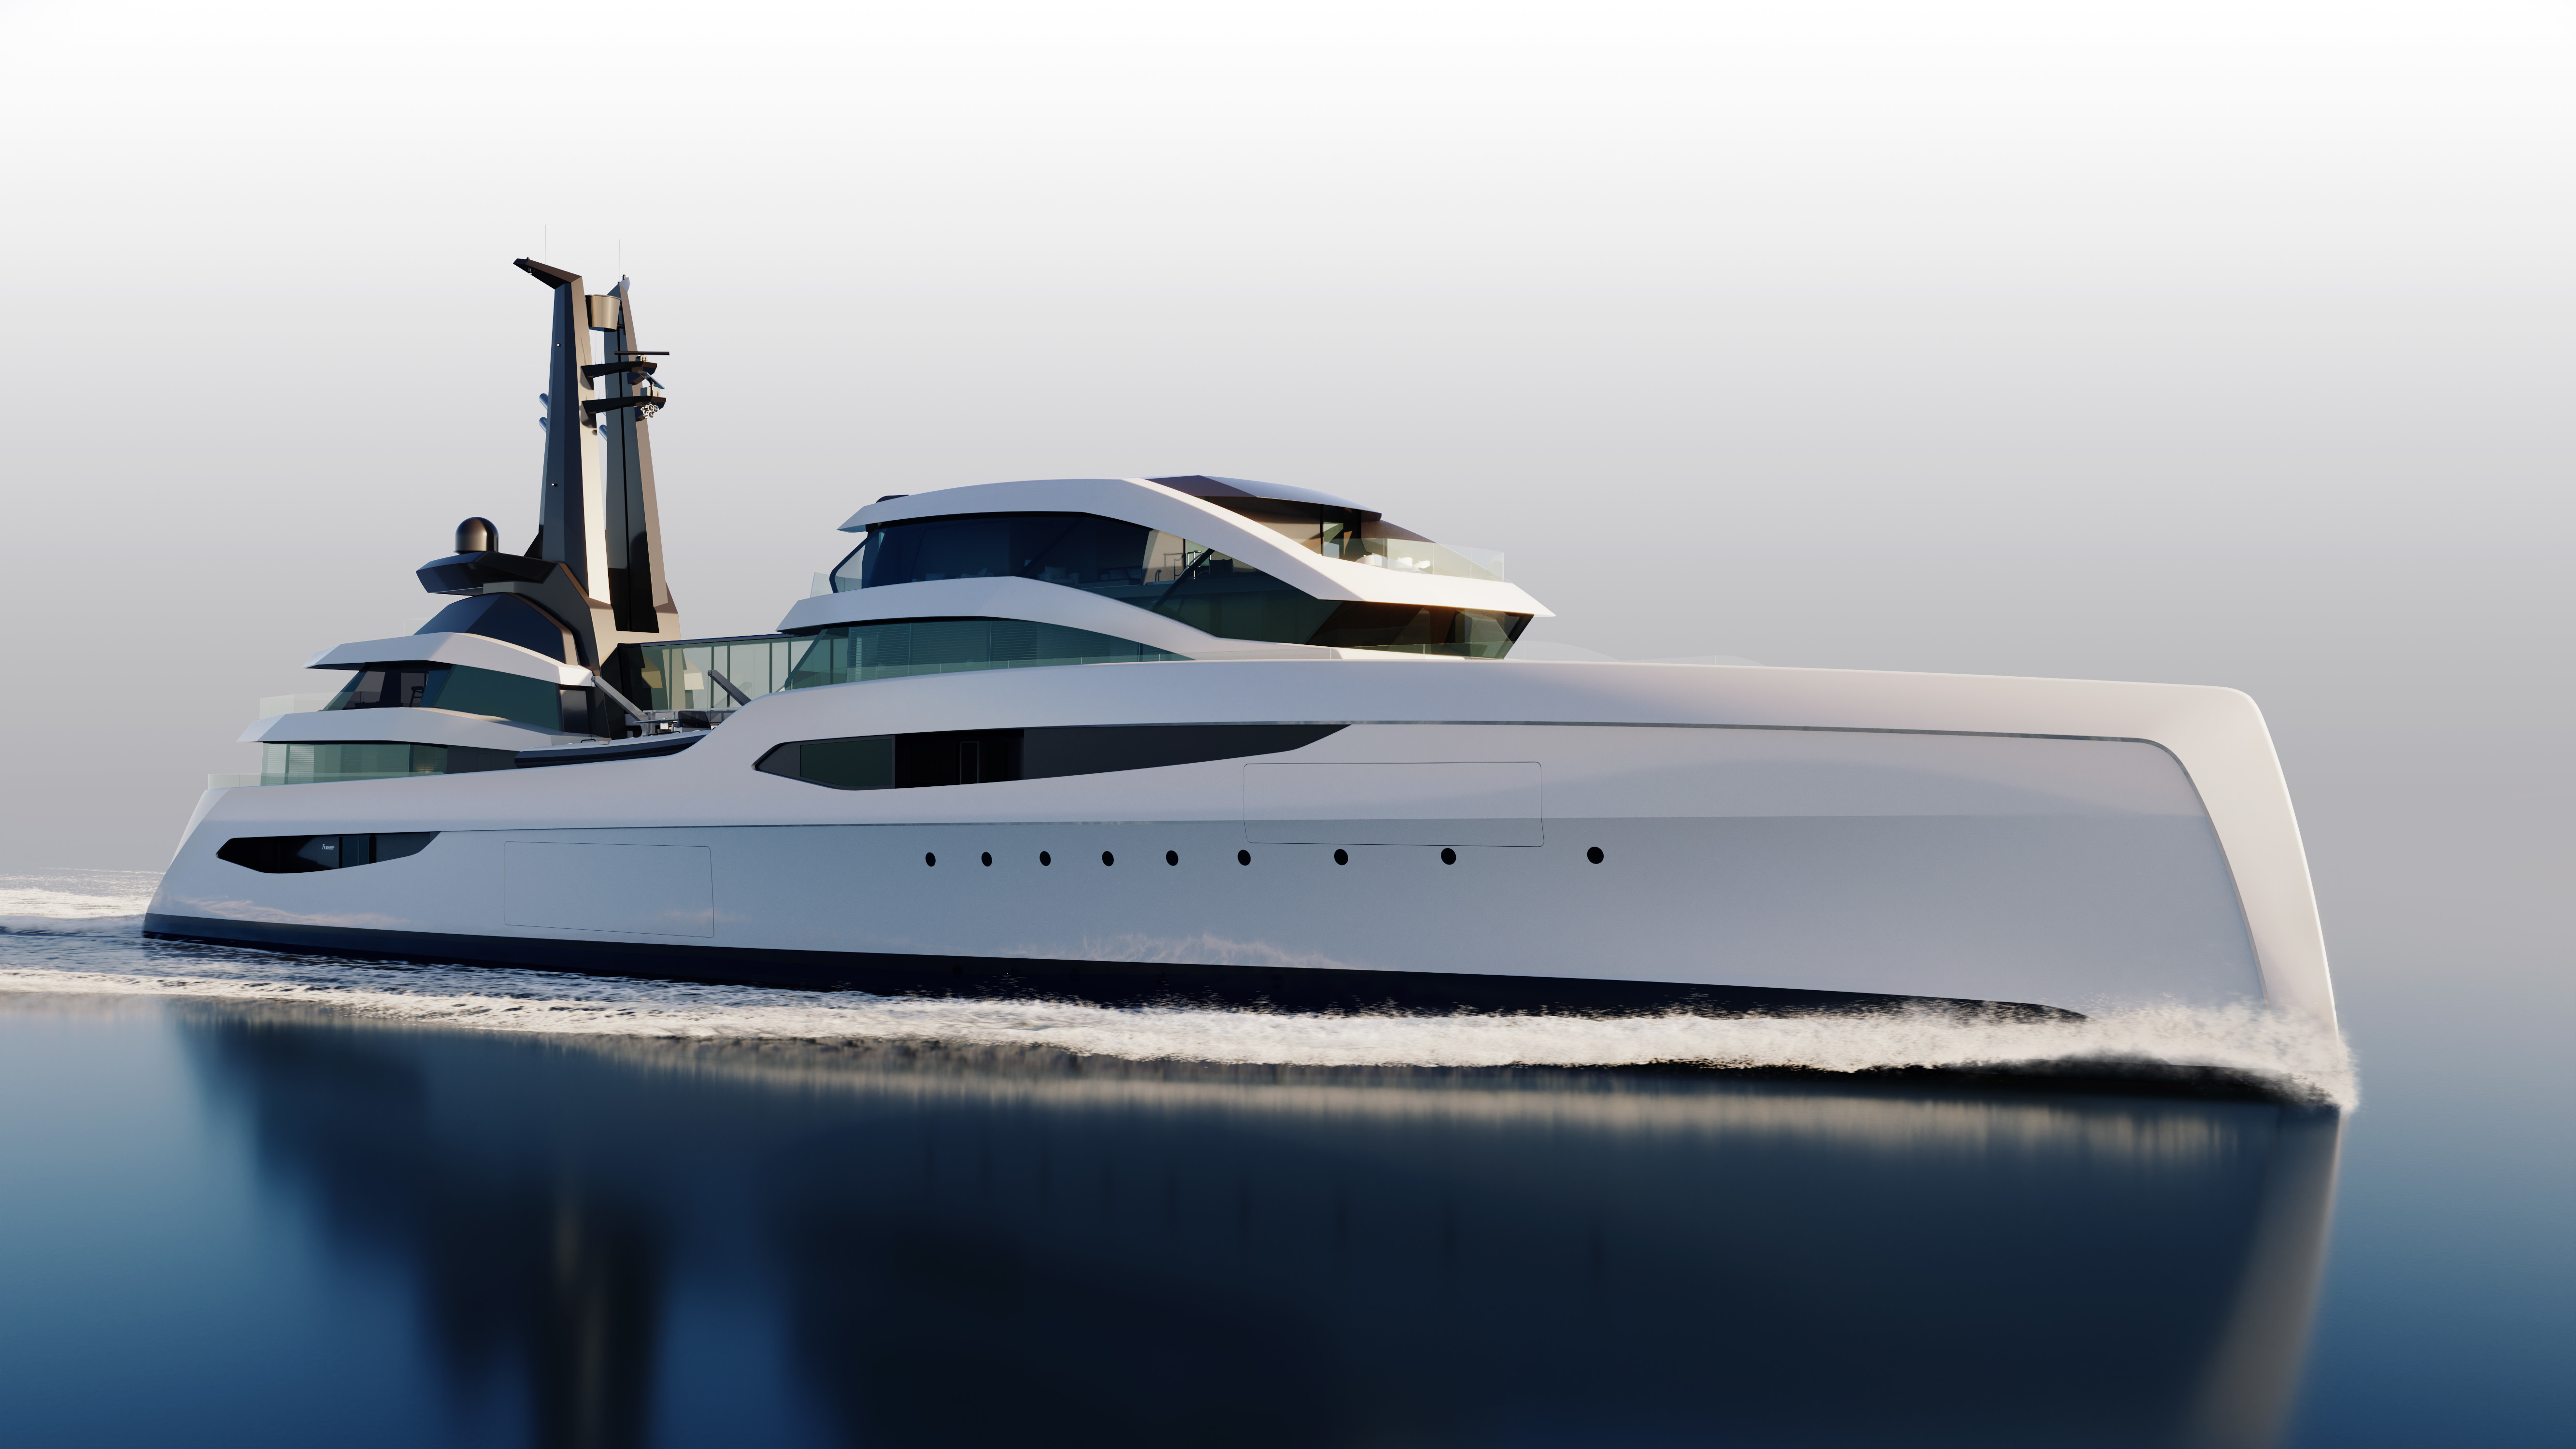 The owners of superyachts built in the Netherlands revealed